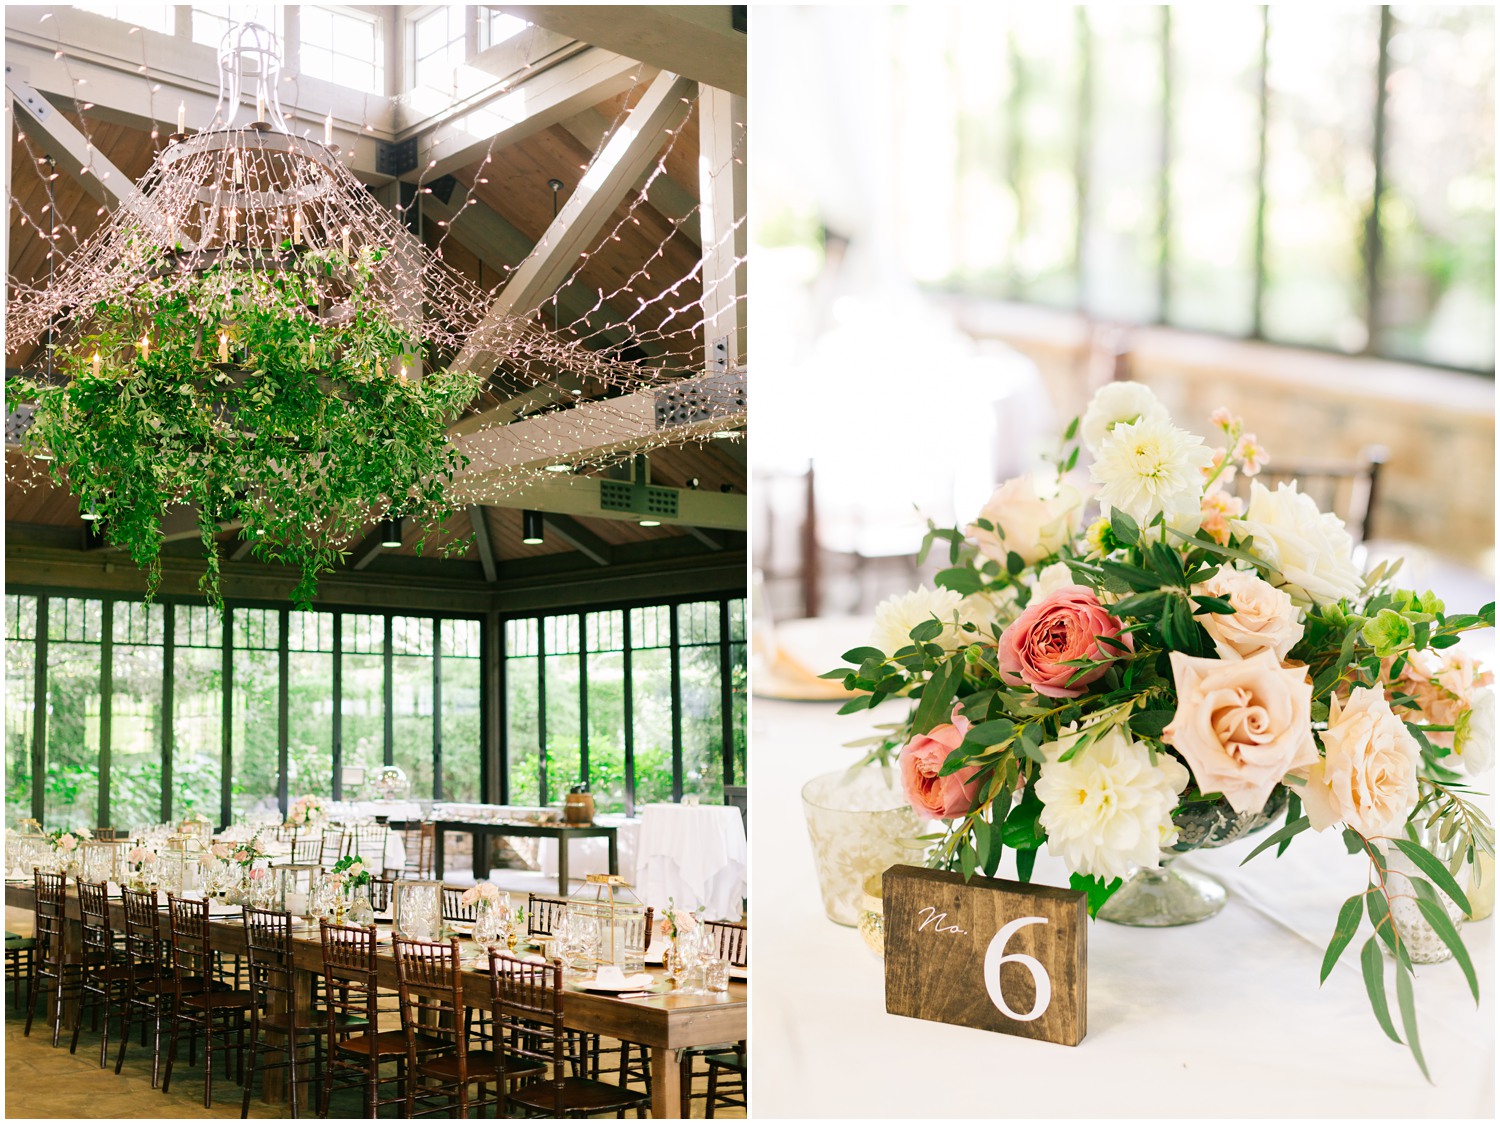 Wedding reception with green, ivory, and pink details at Old Edwards Inn